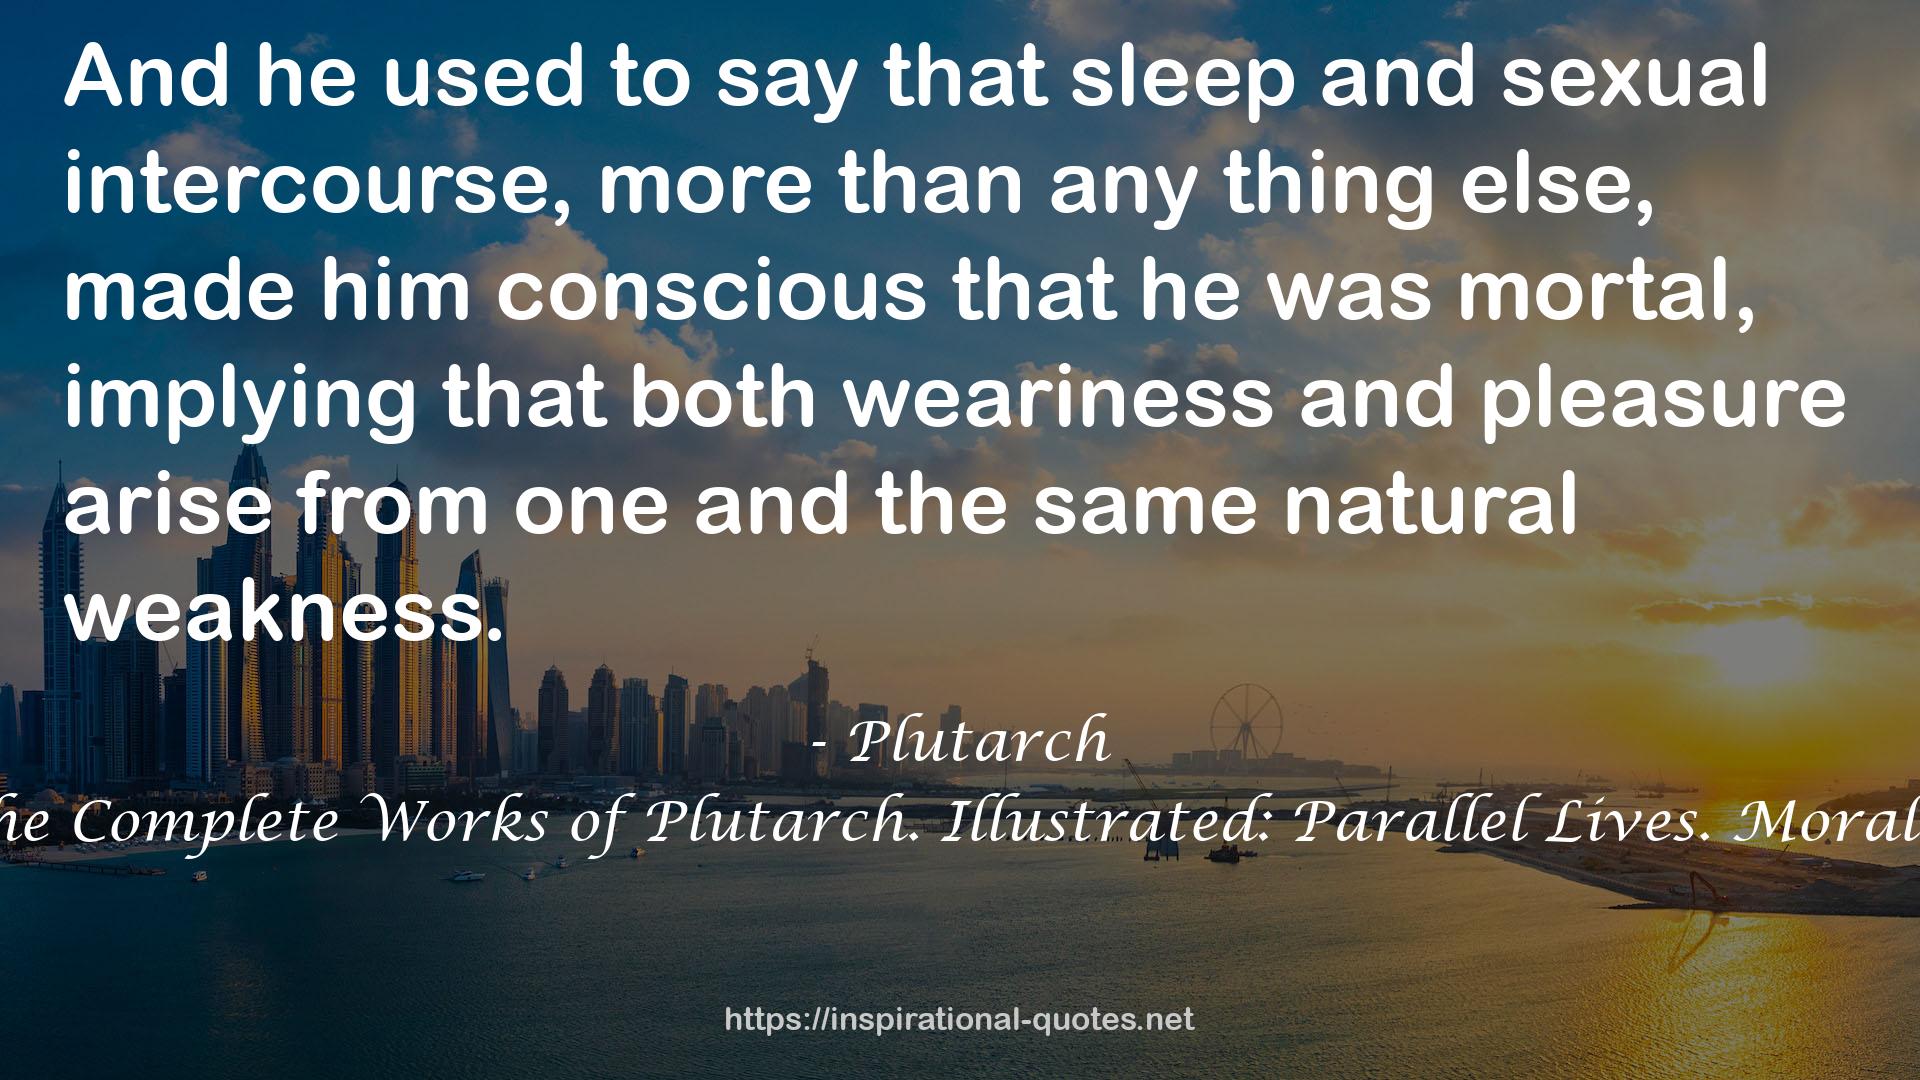 The Complete Works of Plutarch. Illustrated: Parallel Lives. Moralia QUOTES